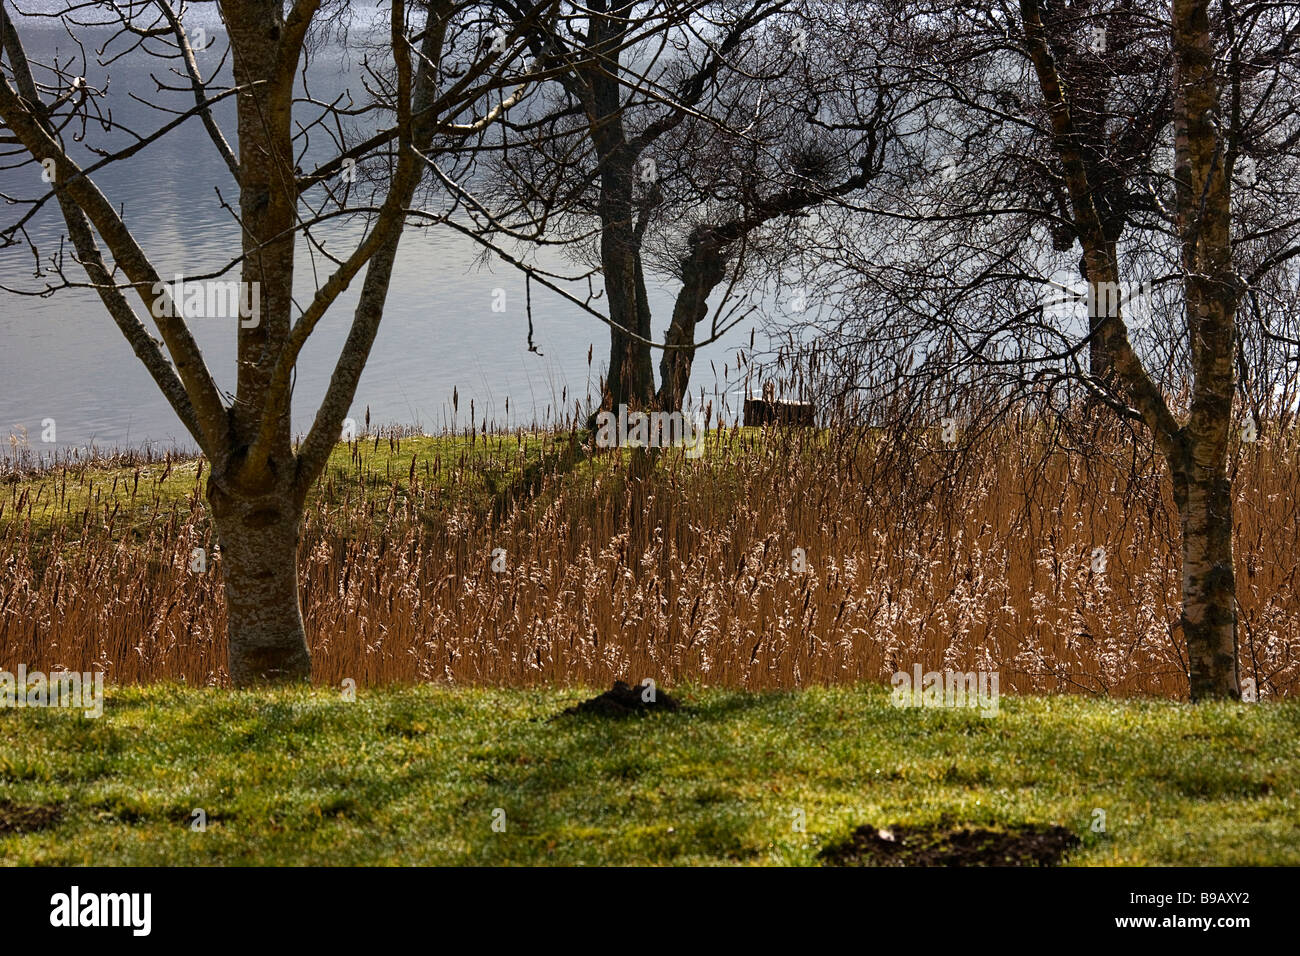 Reeds by St mary's loch.Scottish borders. Stock Photo